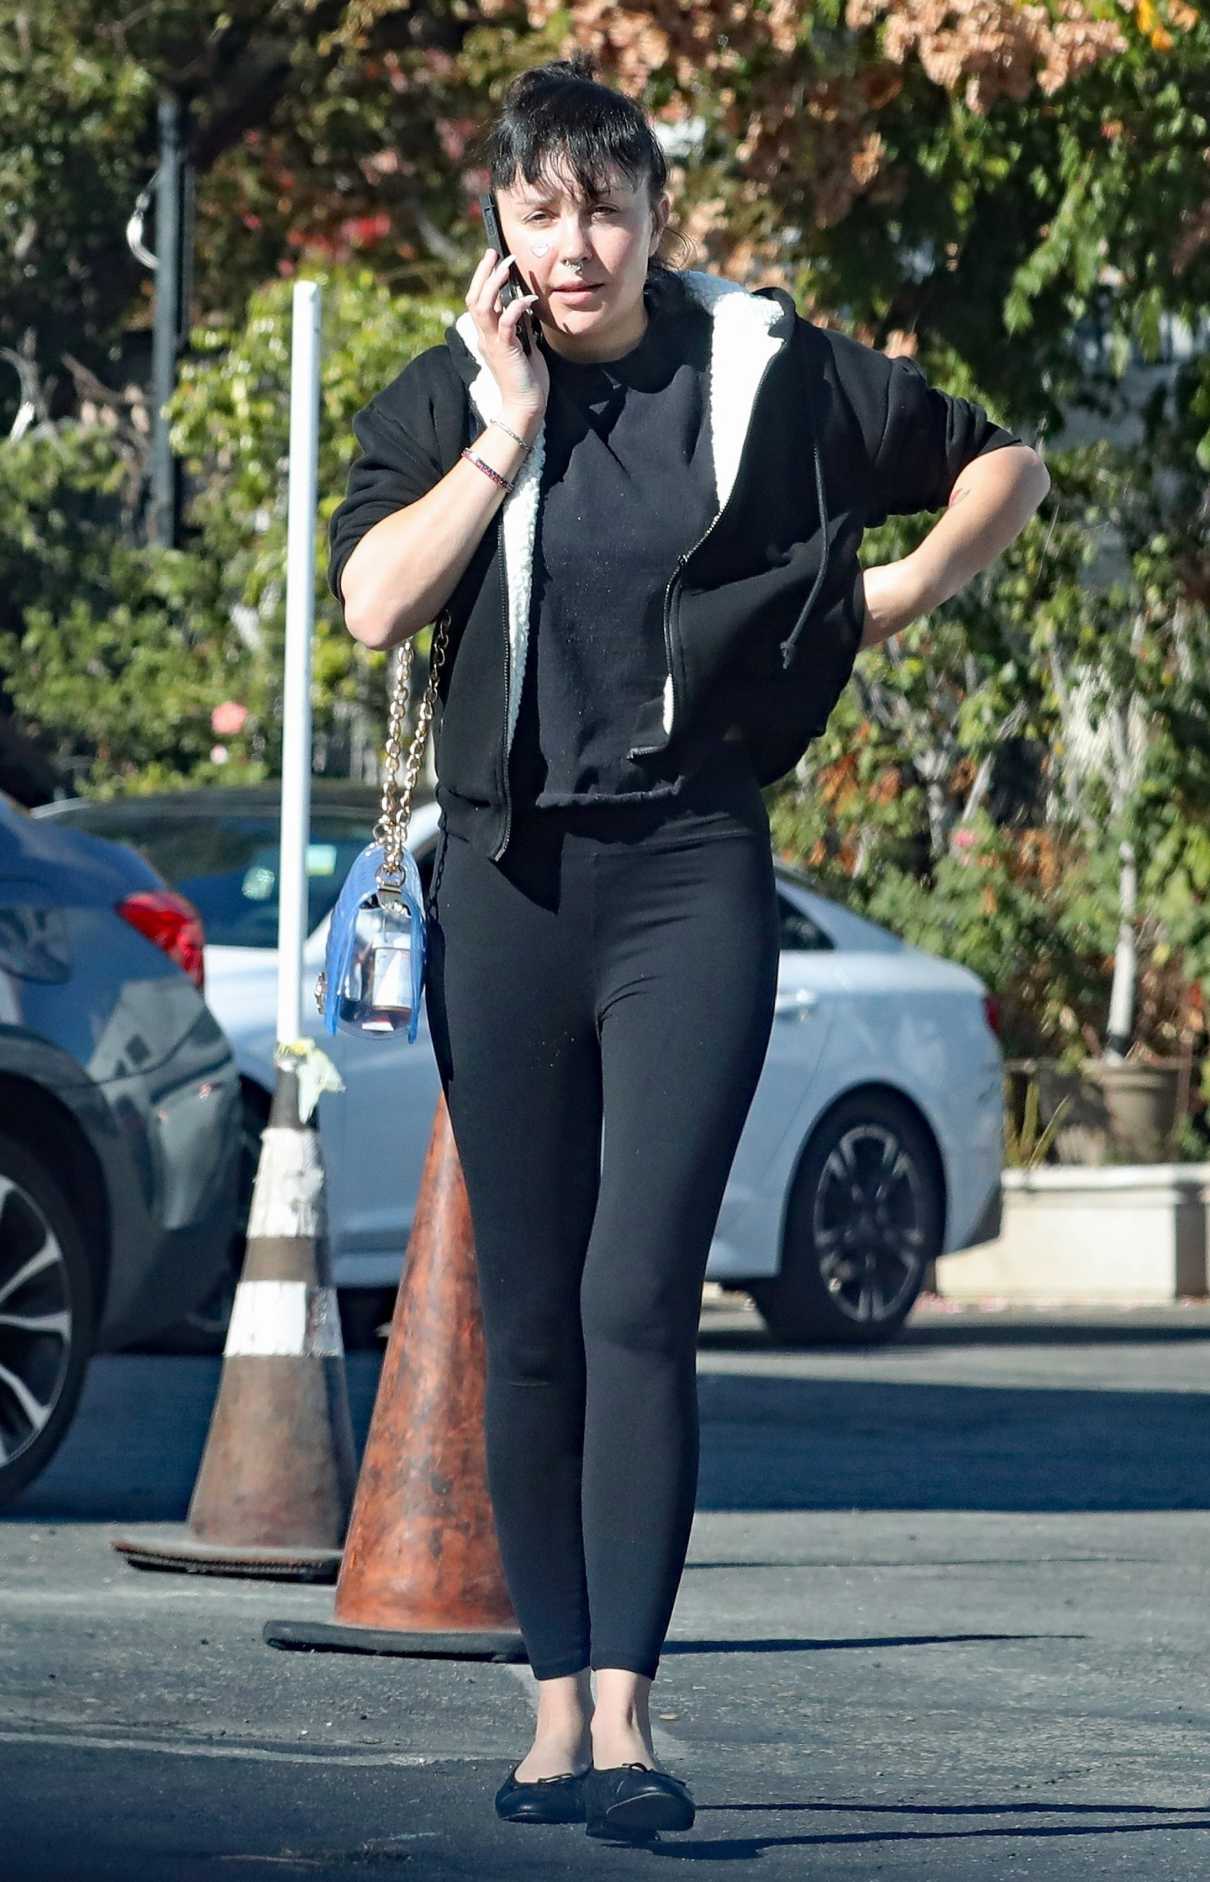 Amanda Bynes in a Black Outfit